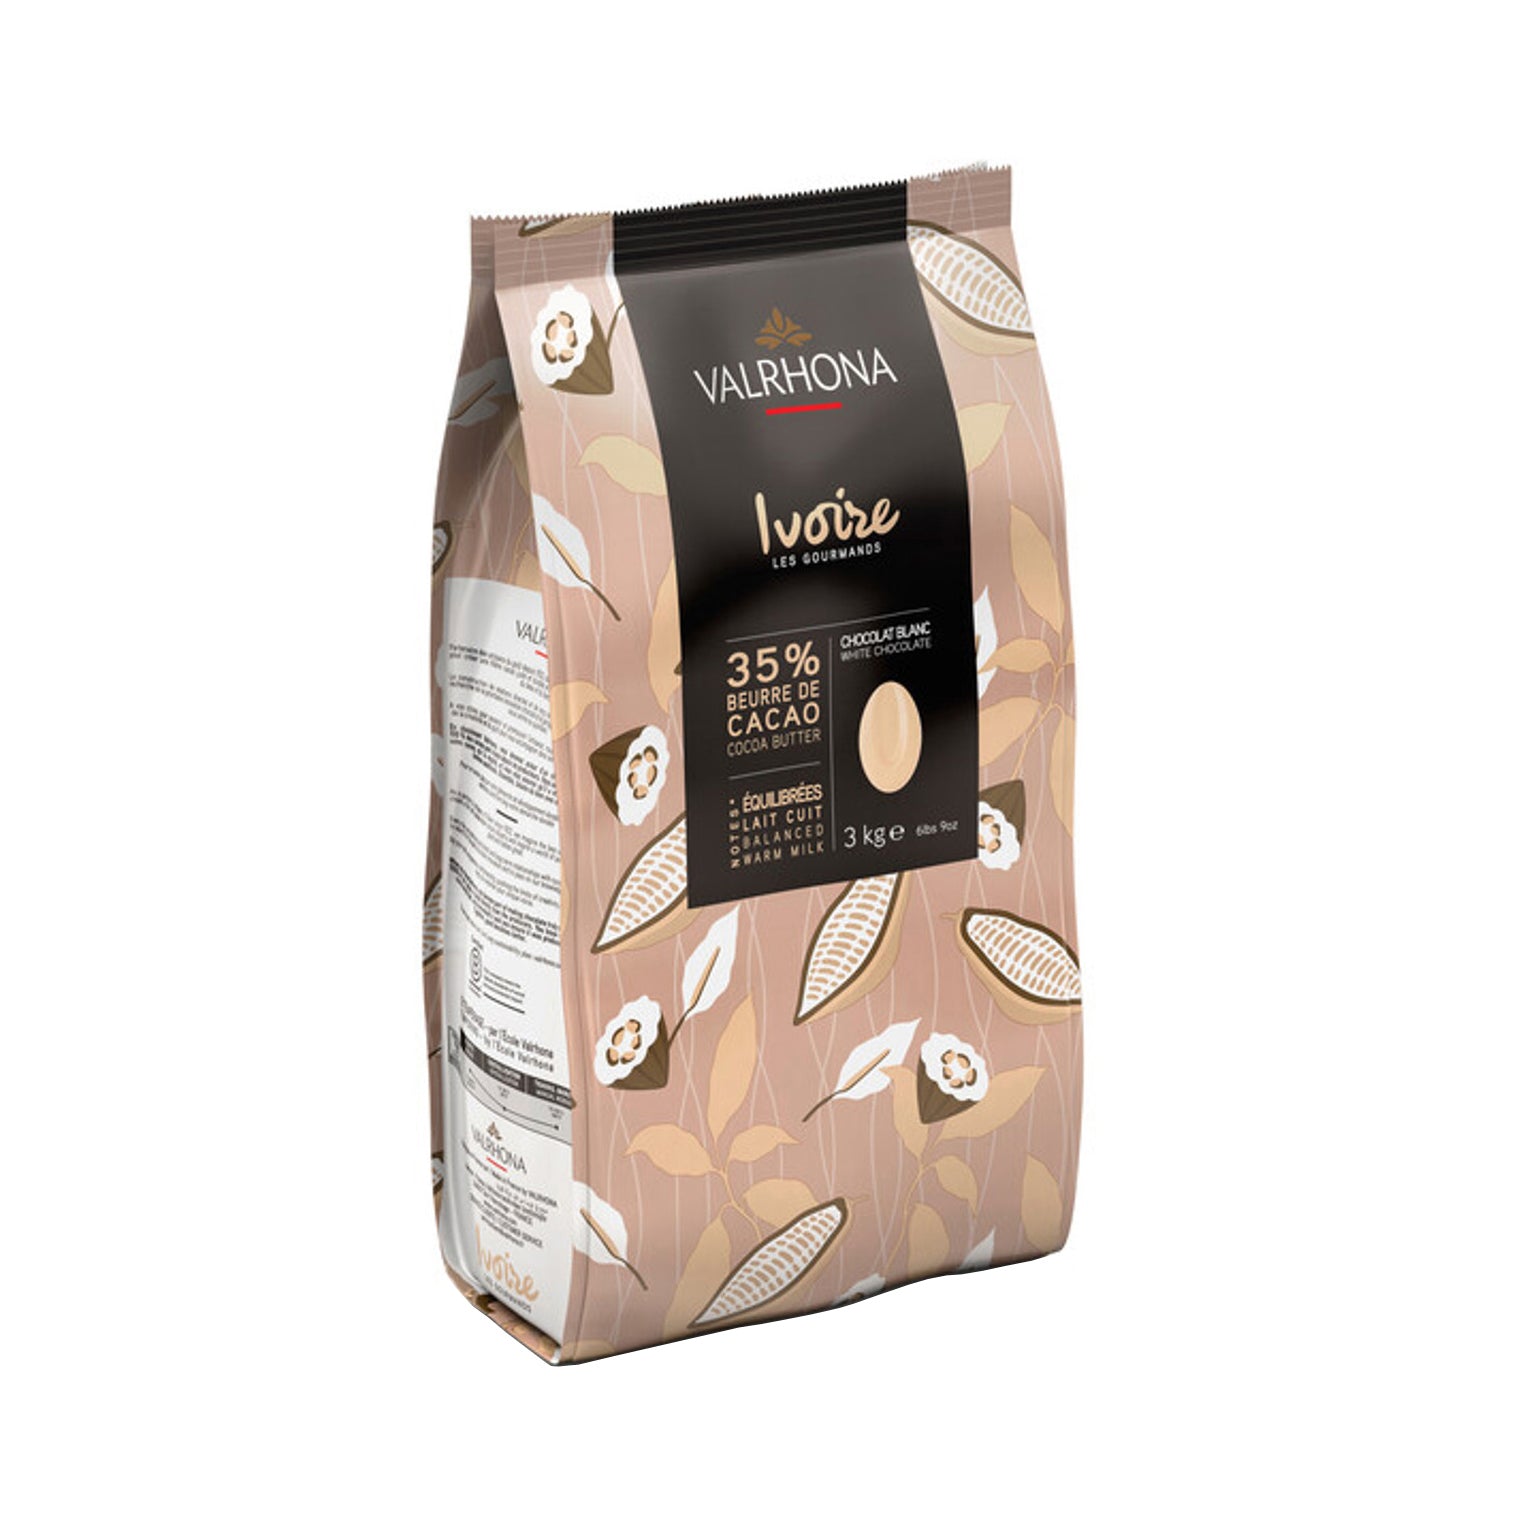 VALRHONA Ivoire 35%, White Chocolate Couverture